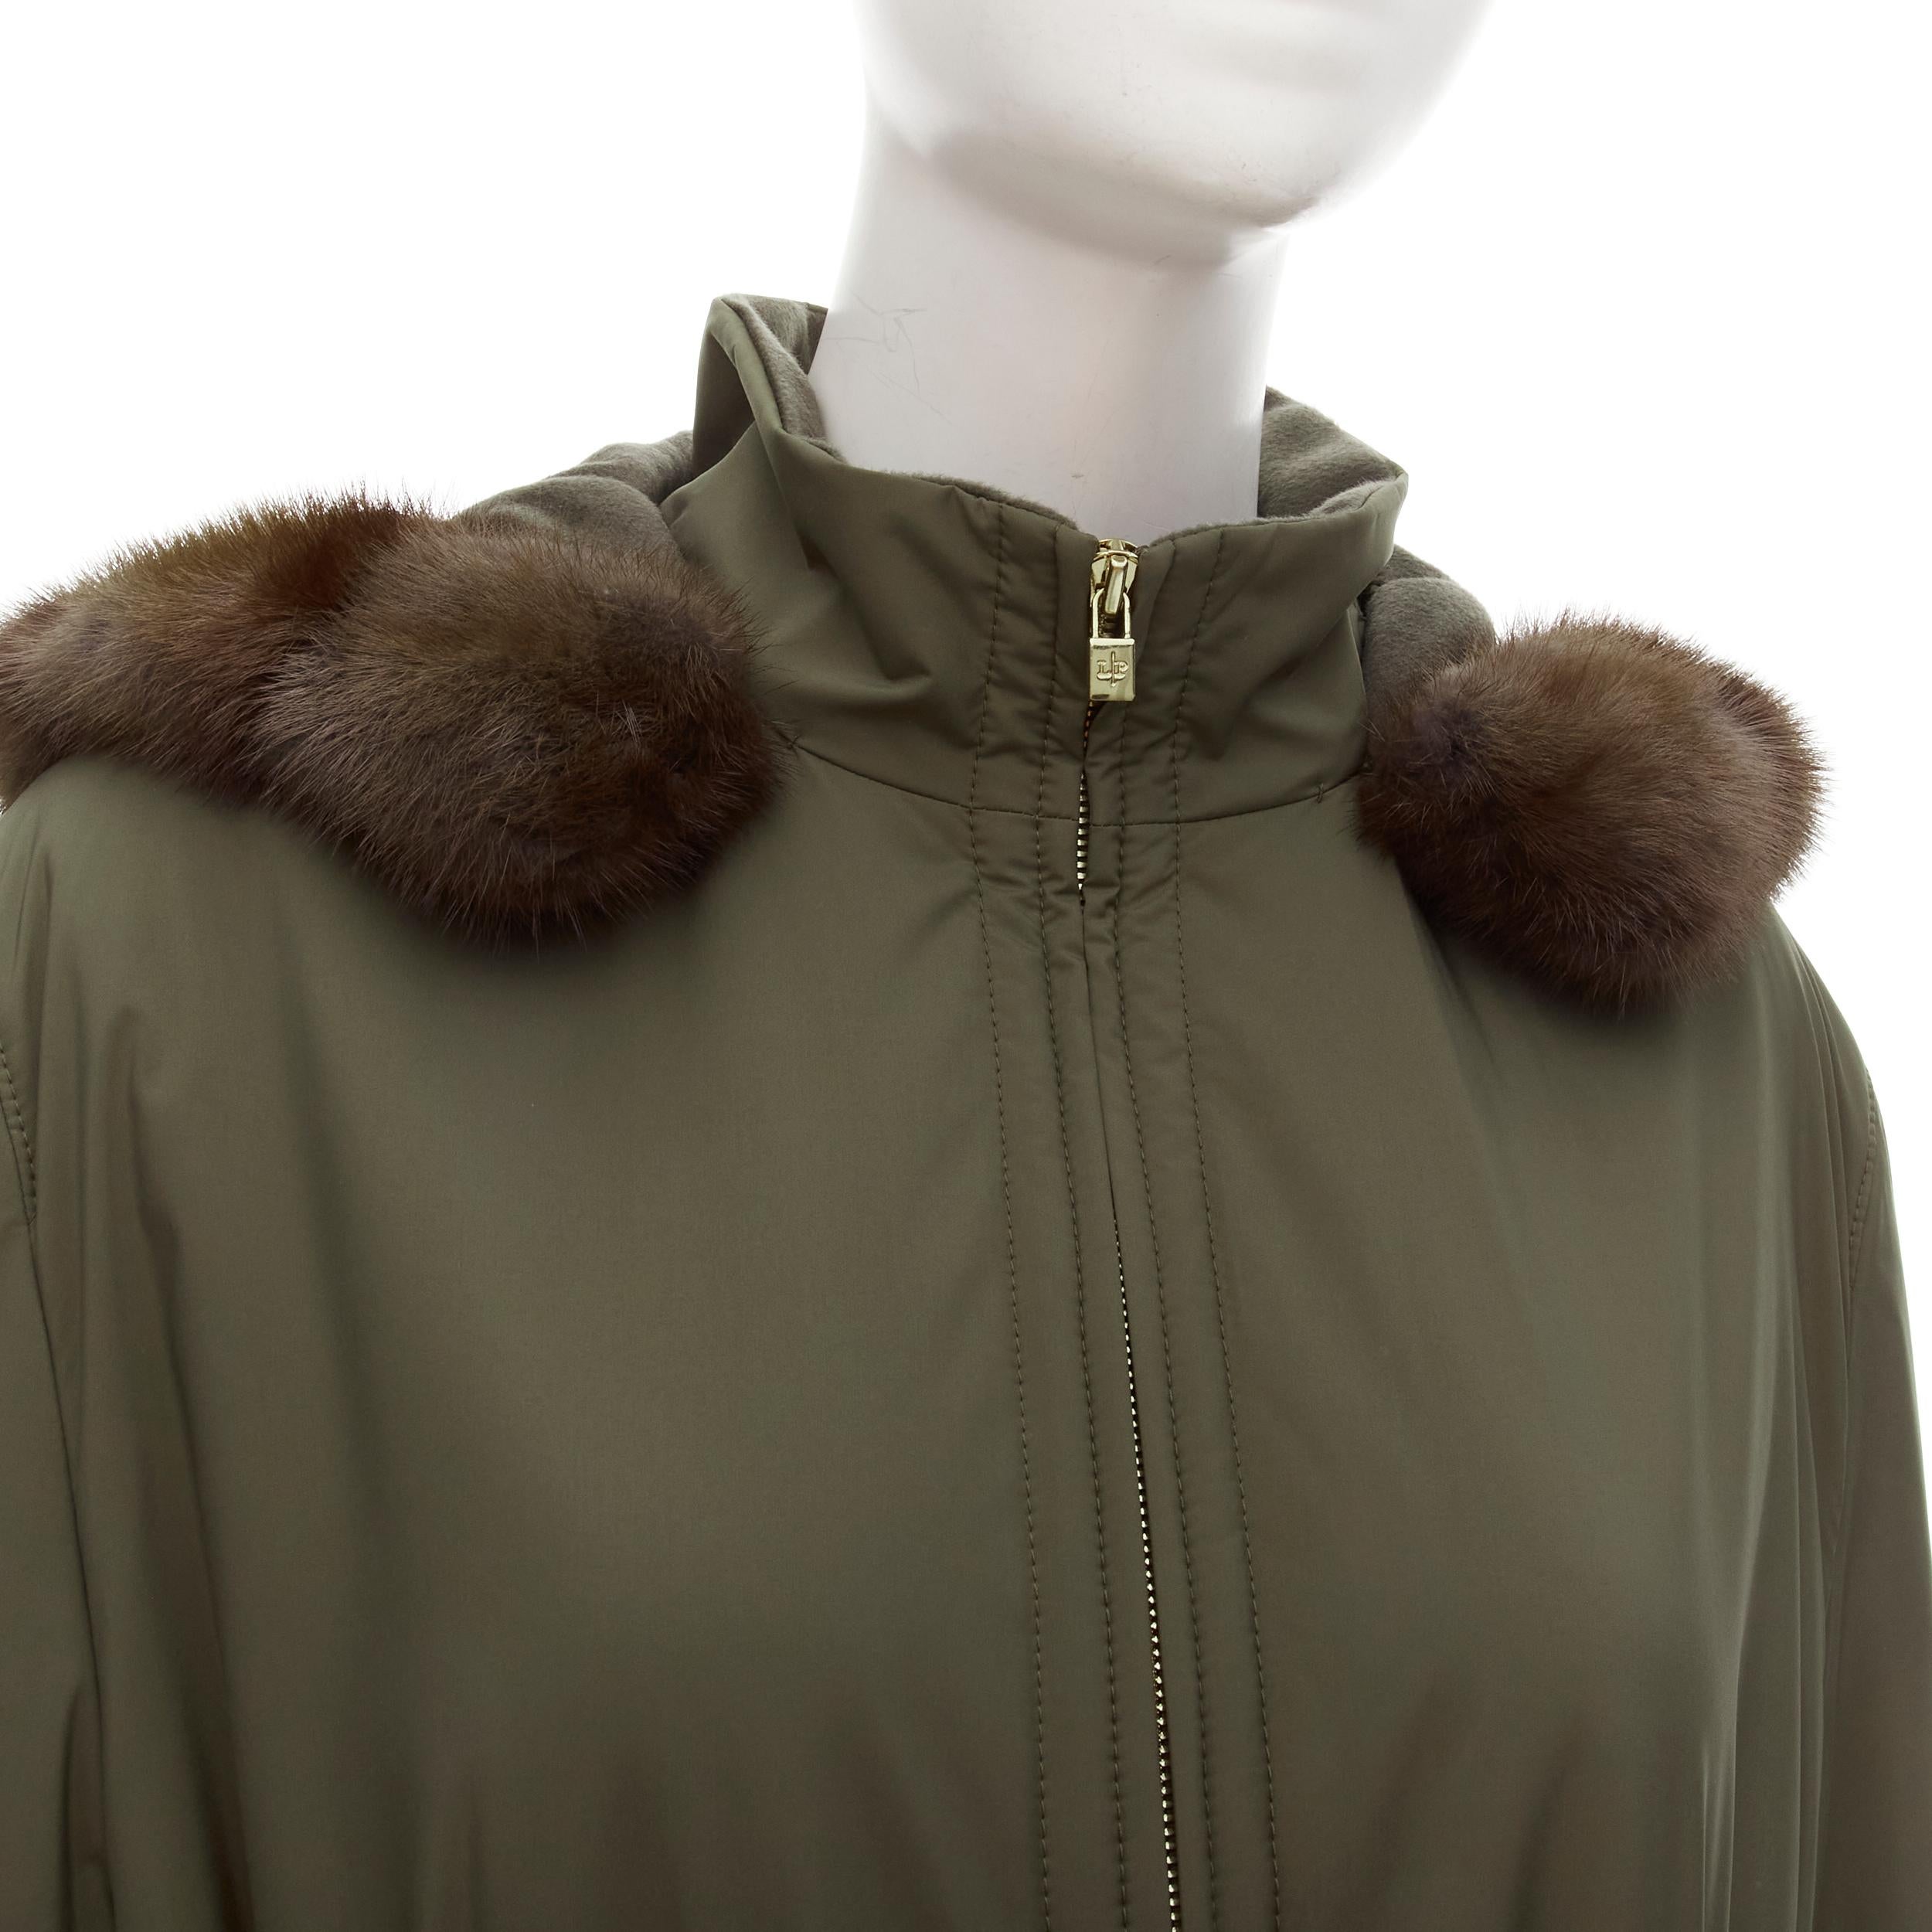 LORO PIANA navy green cashmere lined fur hood belted padded coat jacket IT42 S
Reference: TGAS/C01861
Brand: Loro Piana
Material: Polyester, Cashmere
Color: Green, Brown
Pattern: Solid
Closure: Zip
Lining: Green Cashmere
Extra Details: Cashmere